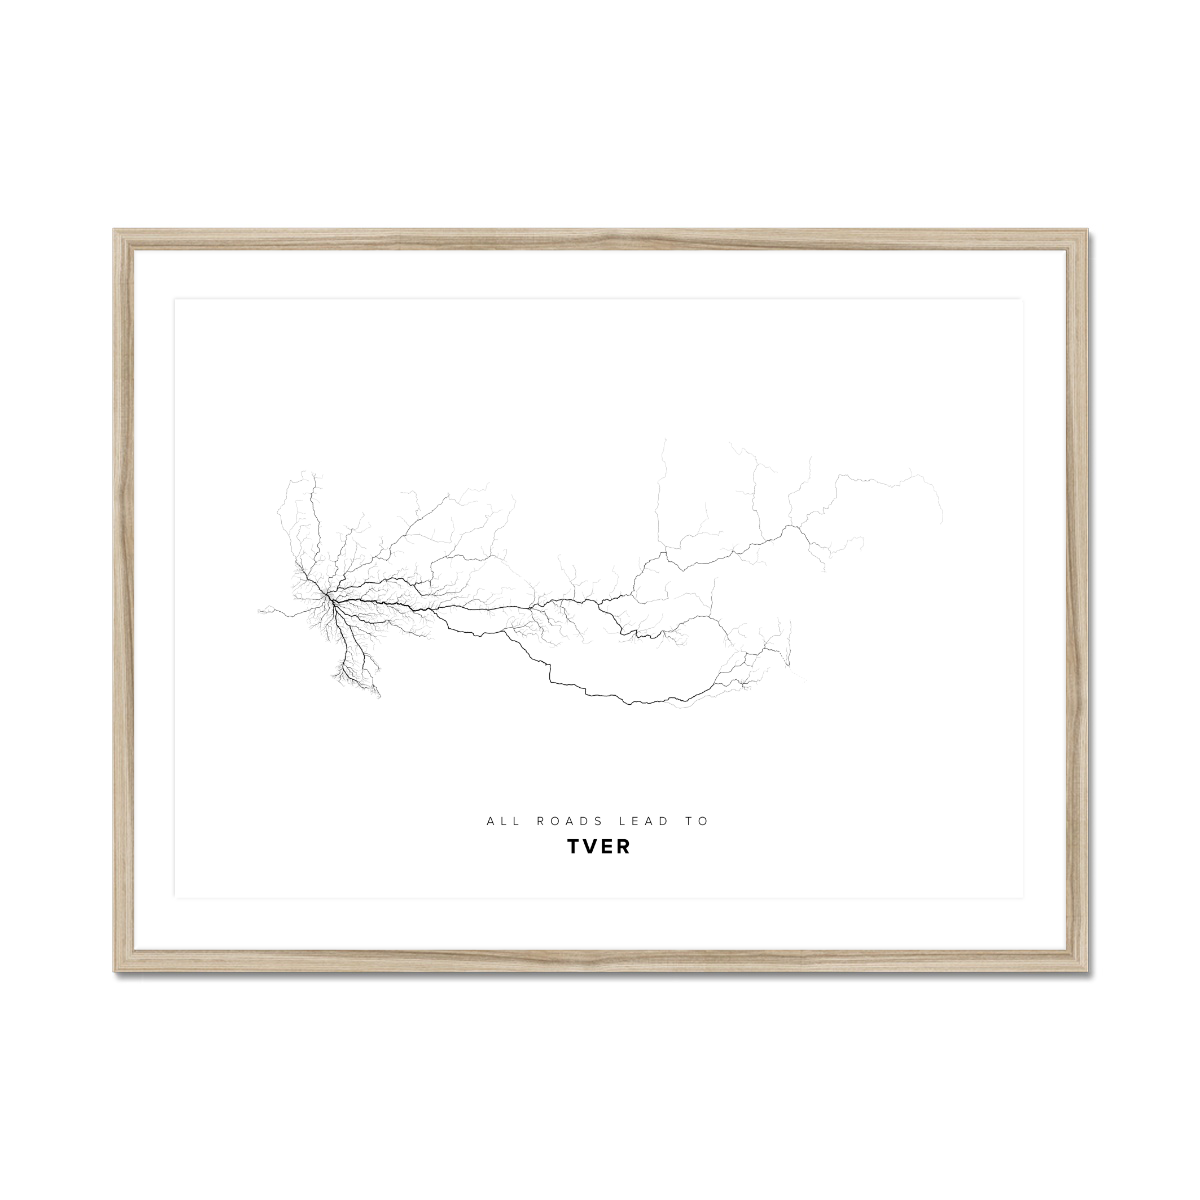 All roads lead to Tver (Russian Federation) Fine Art Map Print